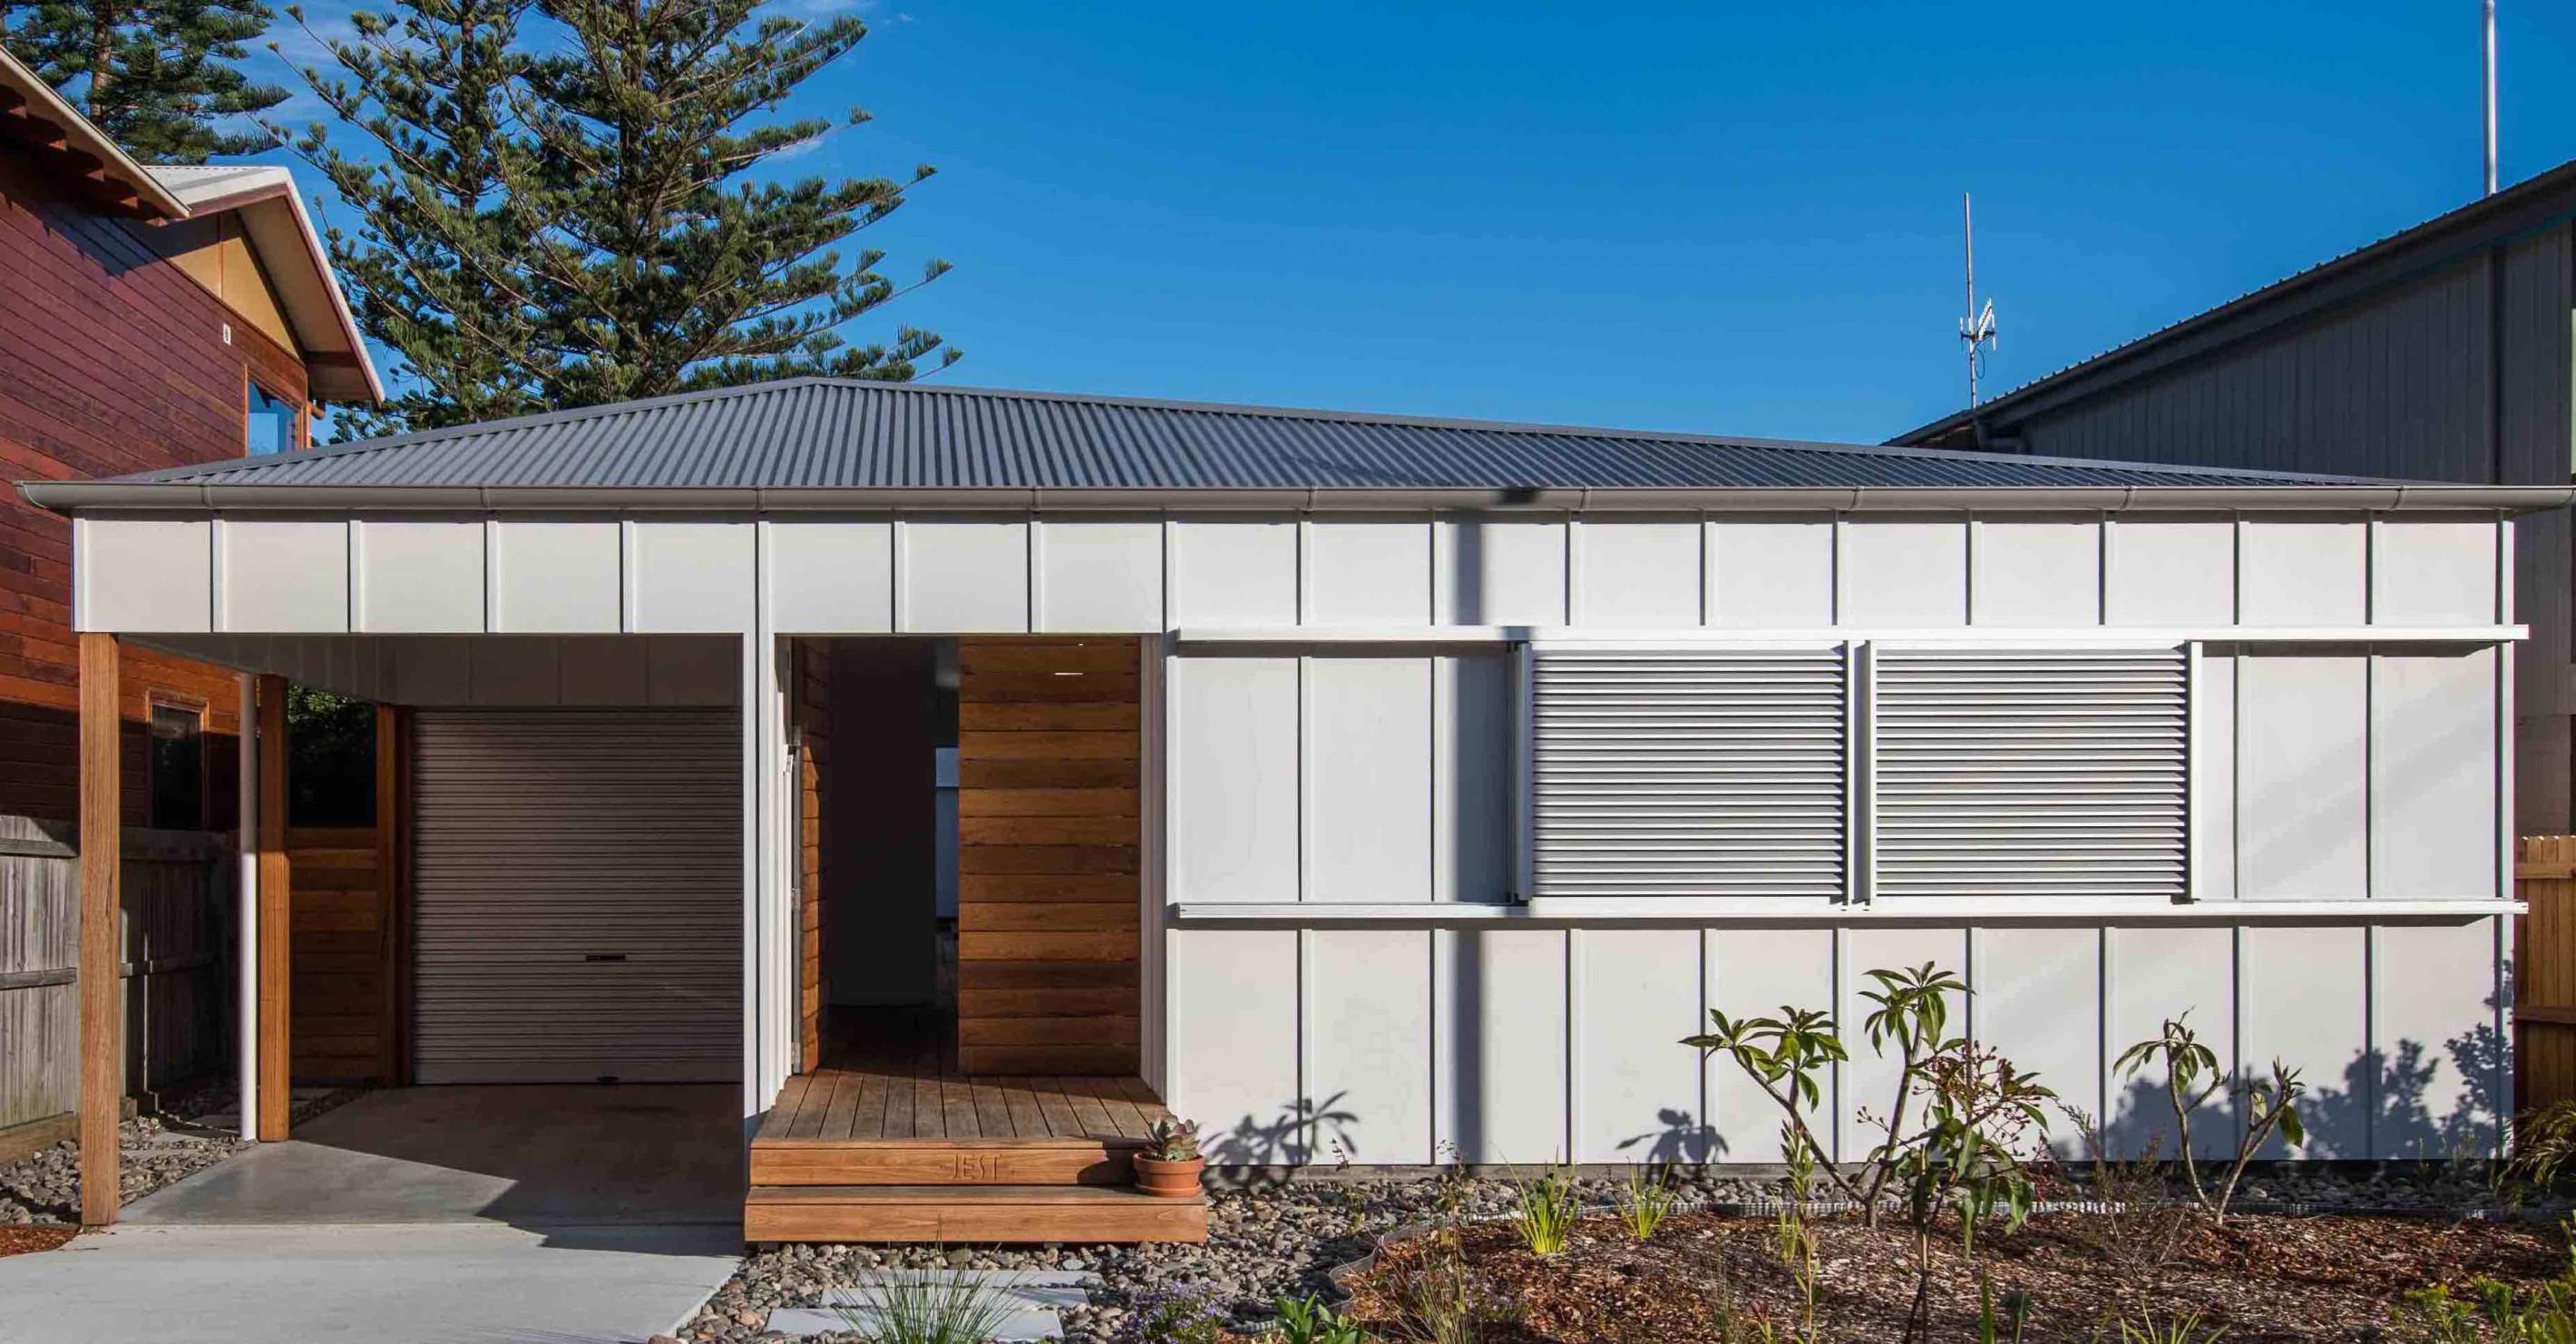 COLORBOND® Ultra steel Wallaby® roofing